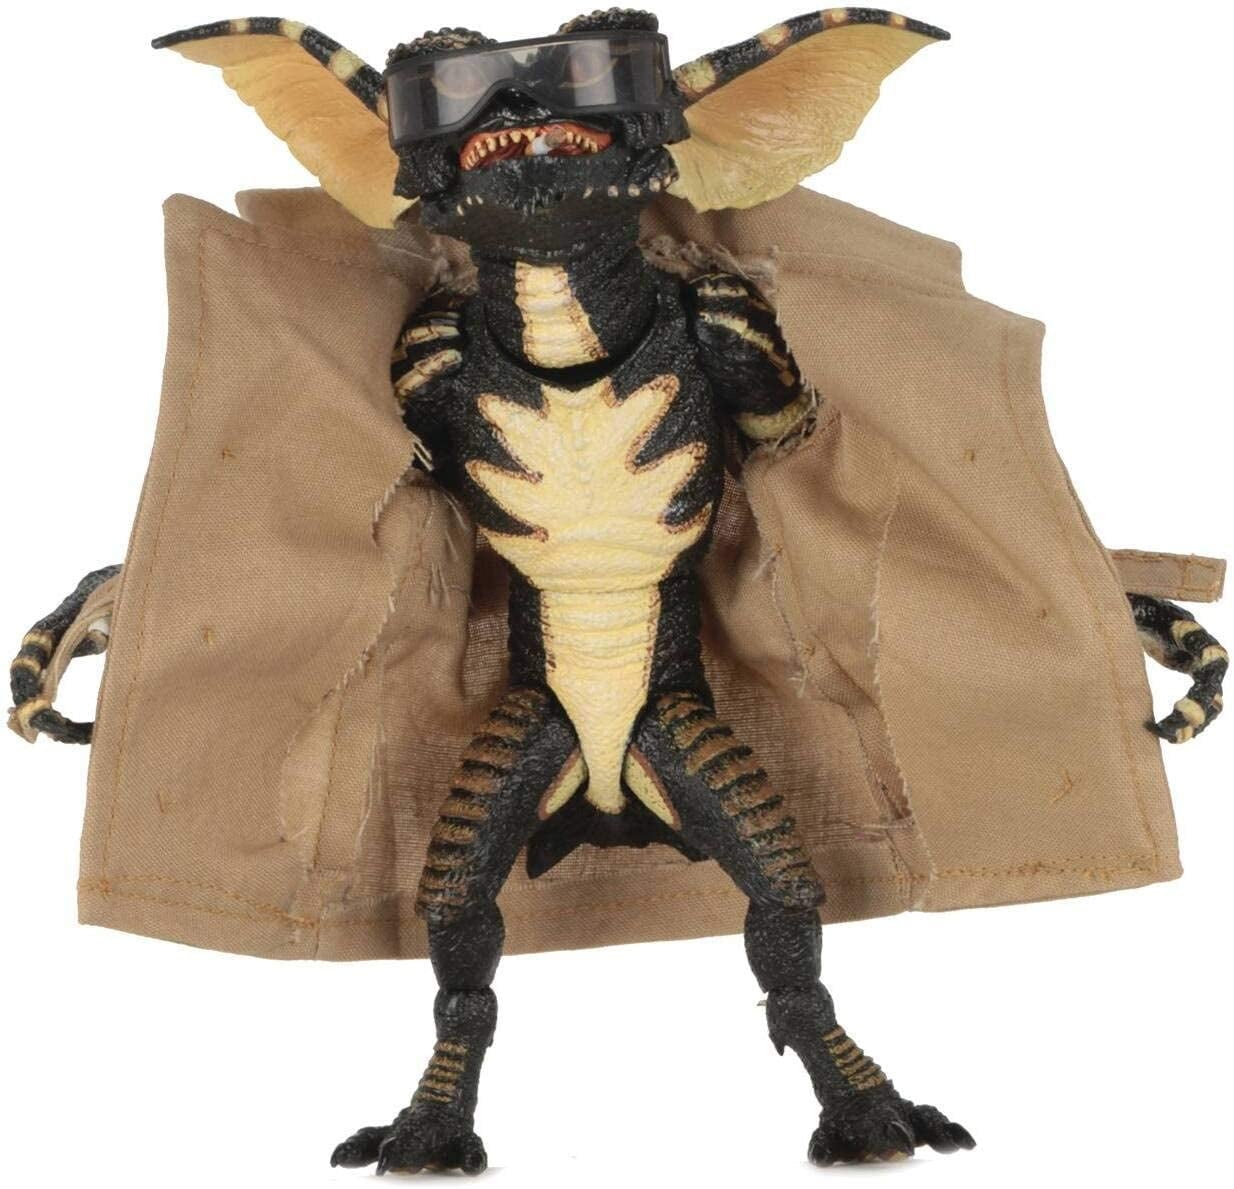 NECA Gremlins 7" Action Figure Ultimate Gizmo NEW BOXED